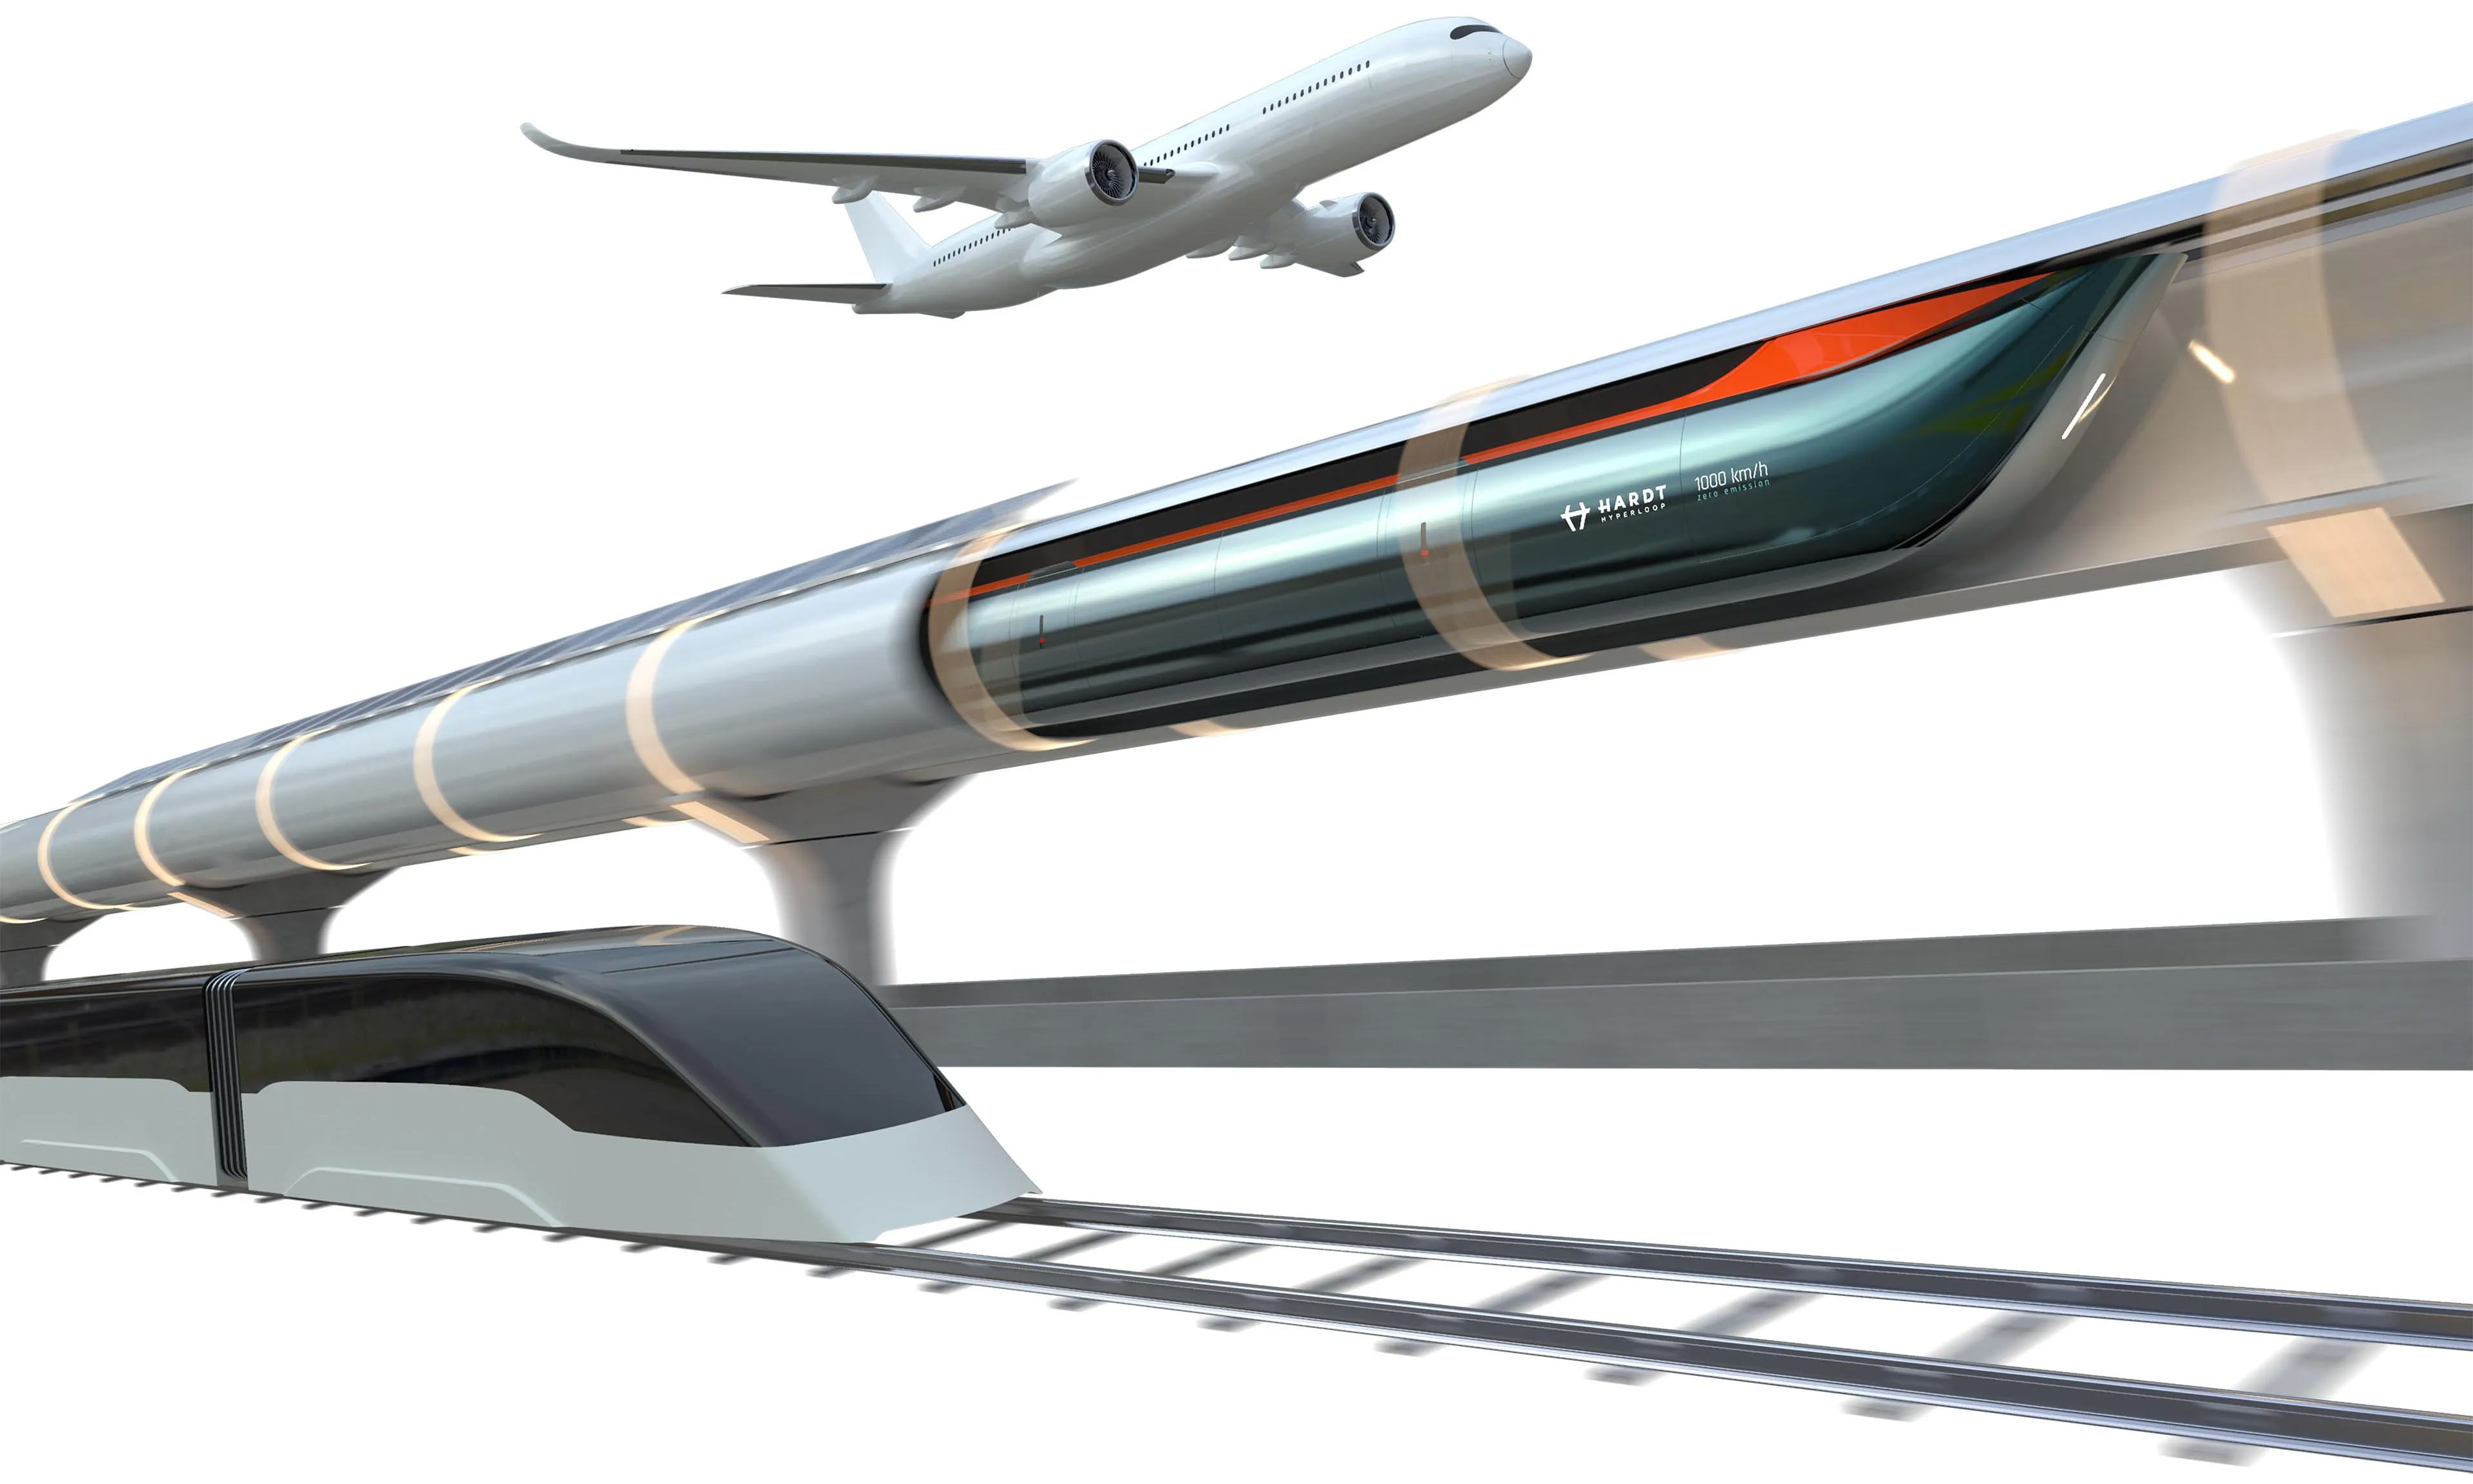 3hardt hyperloop comparison to aviation and rail